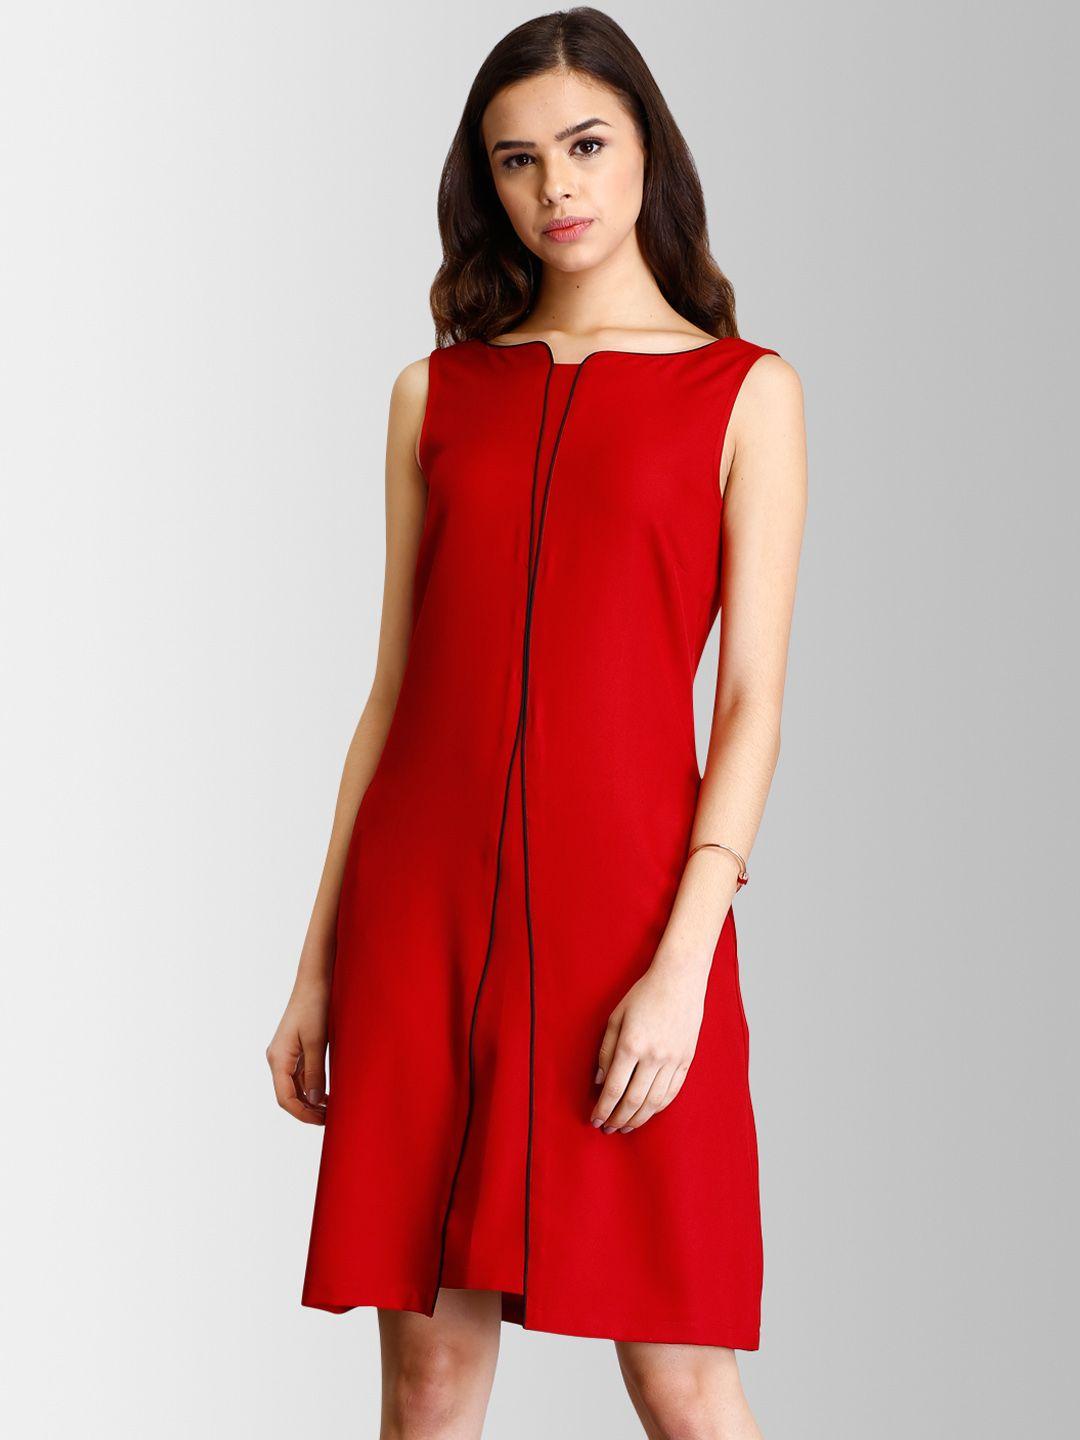 fablestreet women red solid a-line dress